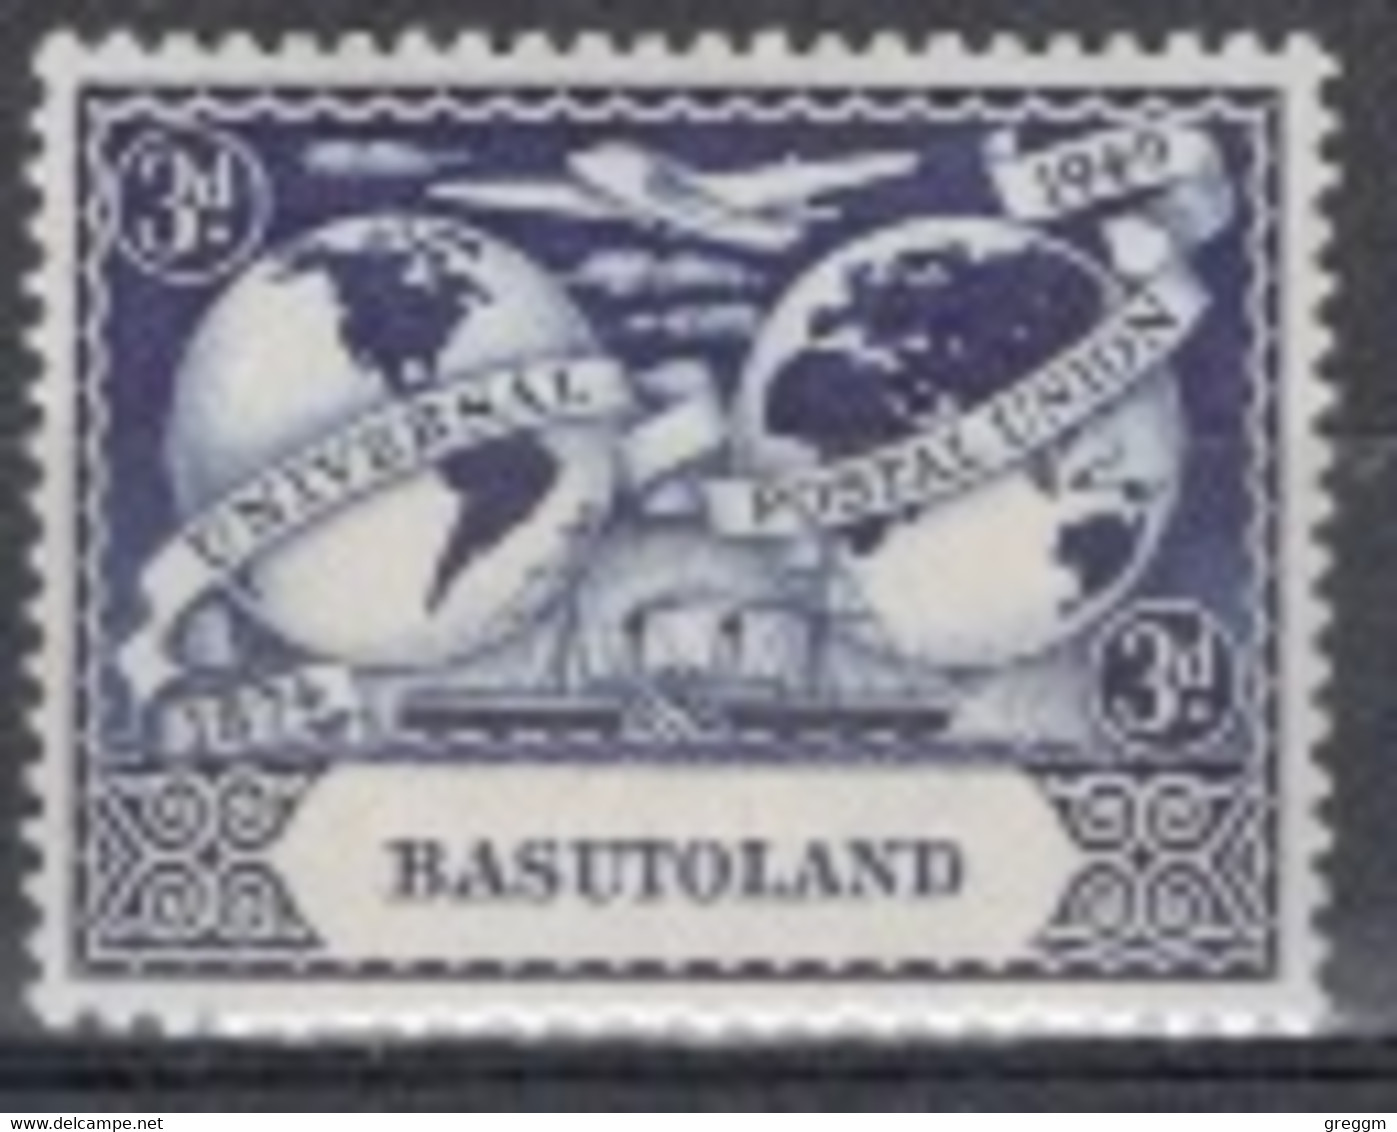 Basutoland 1949 Single 3d Stamp From The UPU Set In Mounted Mint - 1965-1966 Self Government